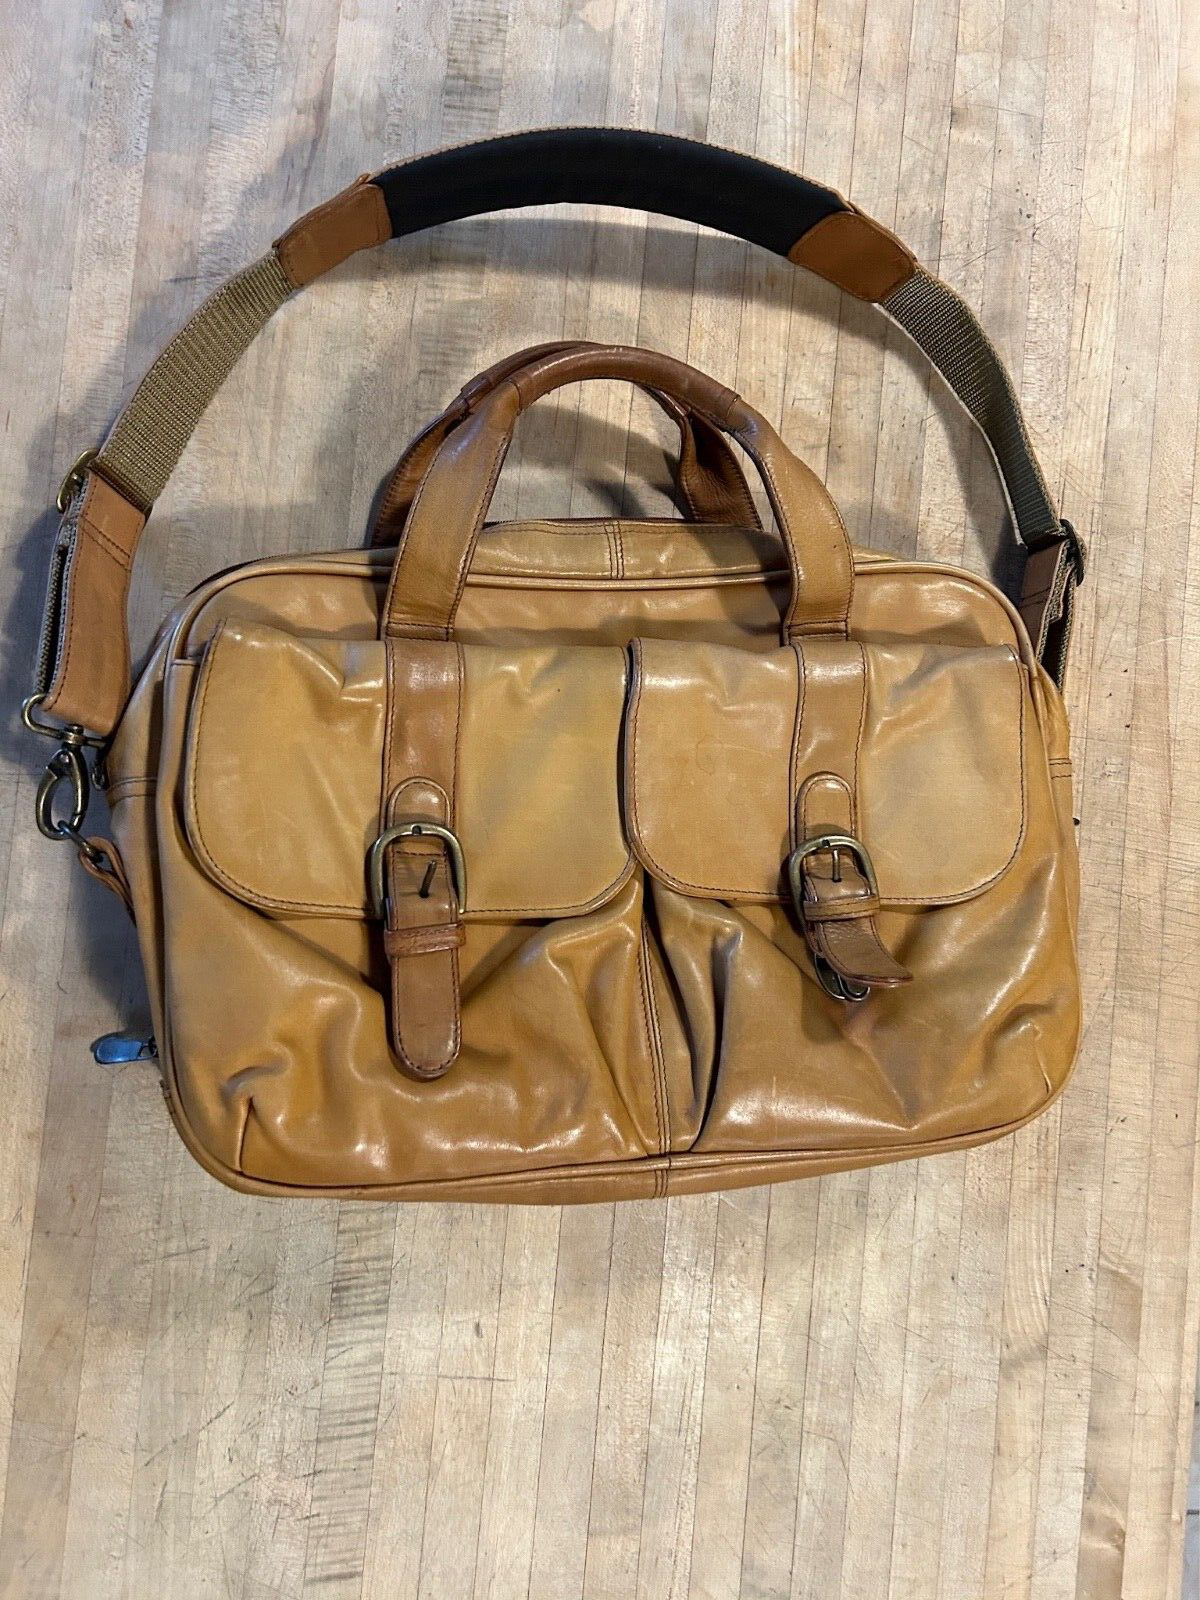 VTG Leather Computer Laptop Travel Bag Brand? Well Made - Light Brown Leather.